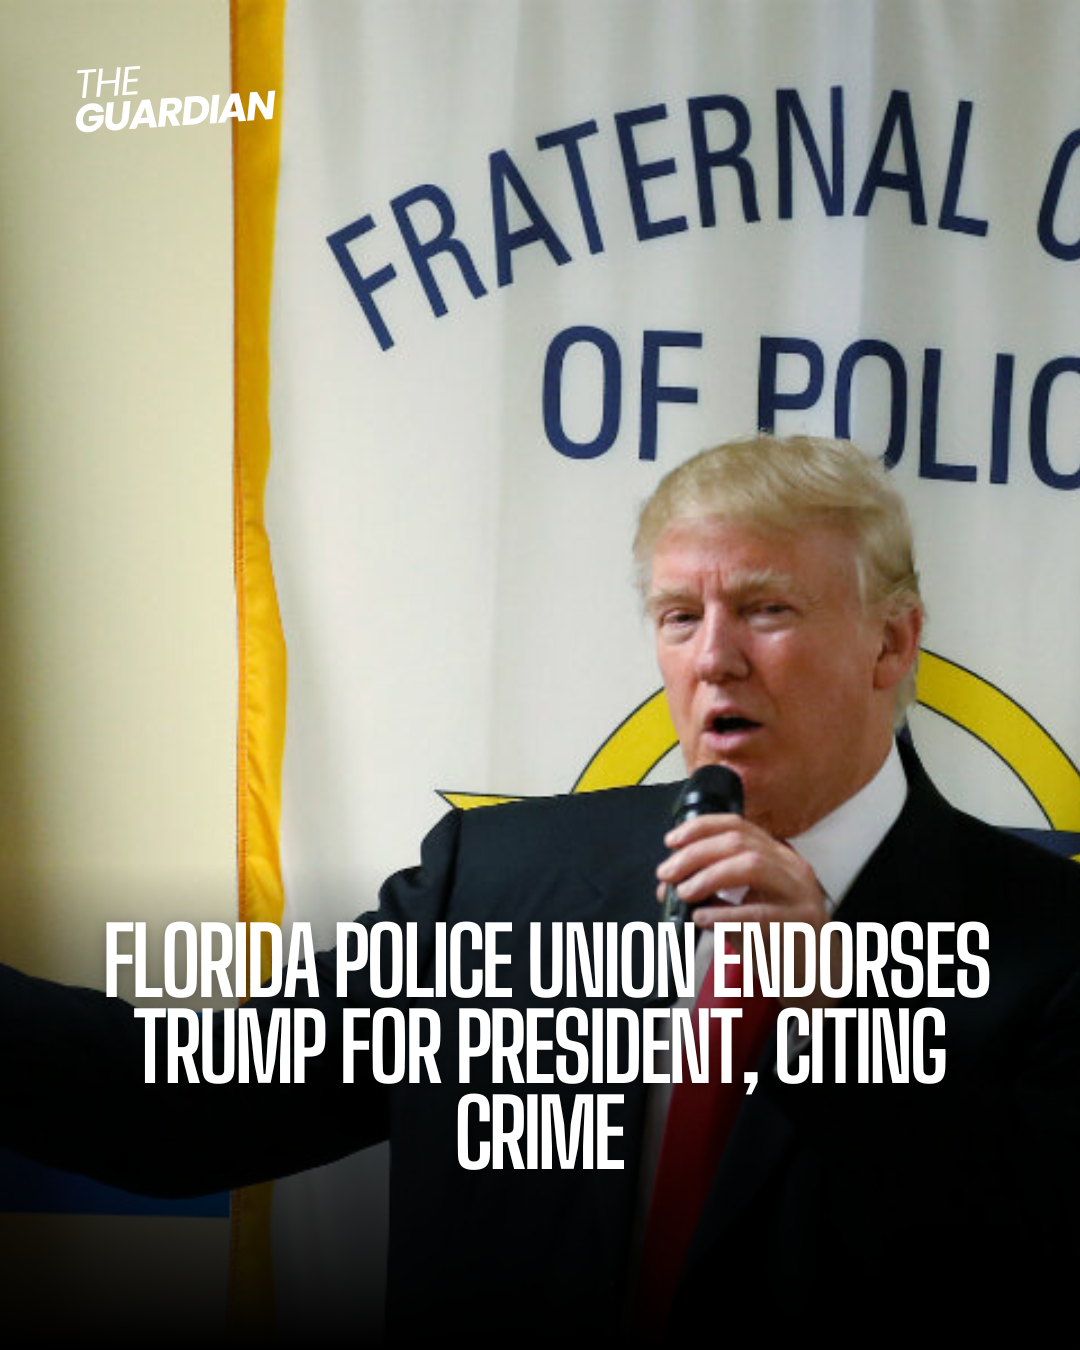 The Florida PBA has endorsed former President Donald Trump in the 2018 presidential election.